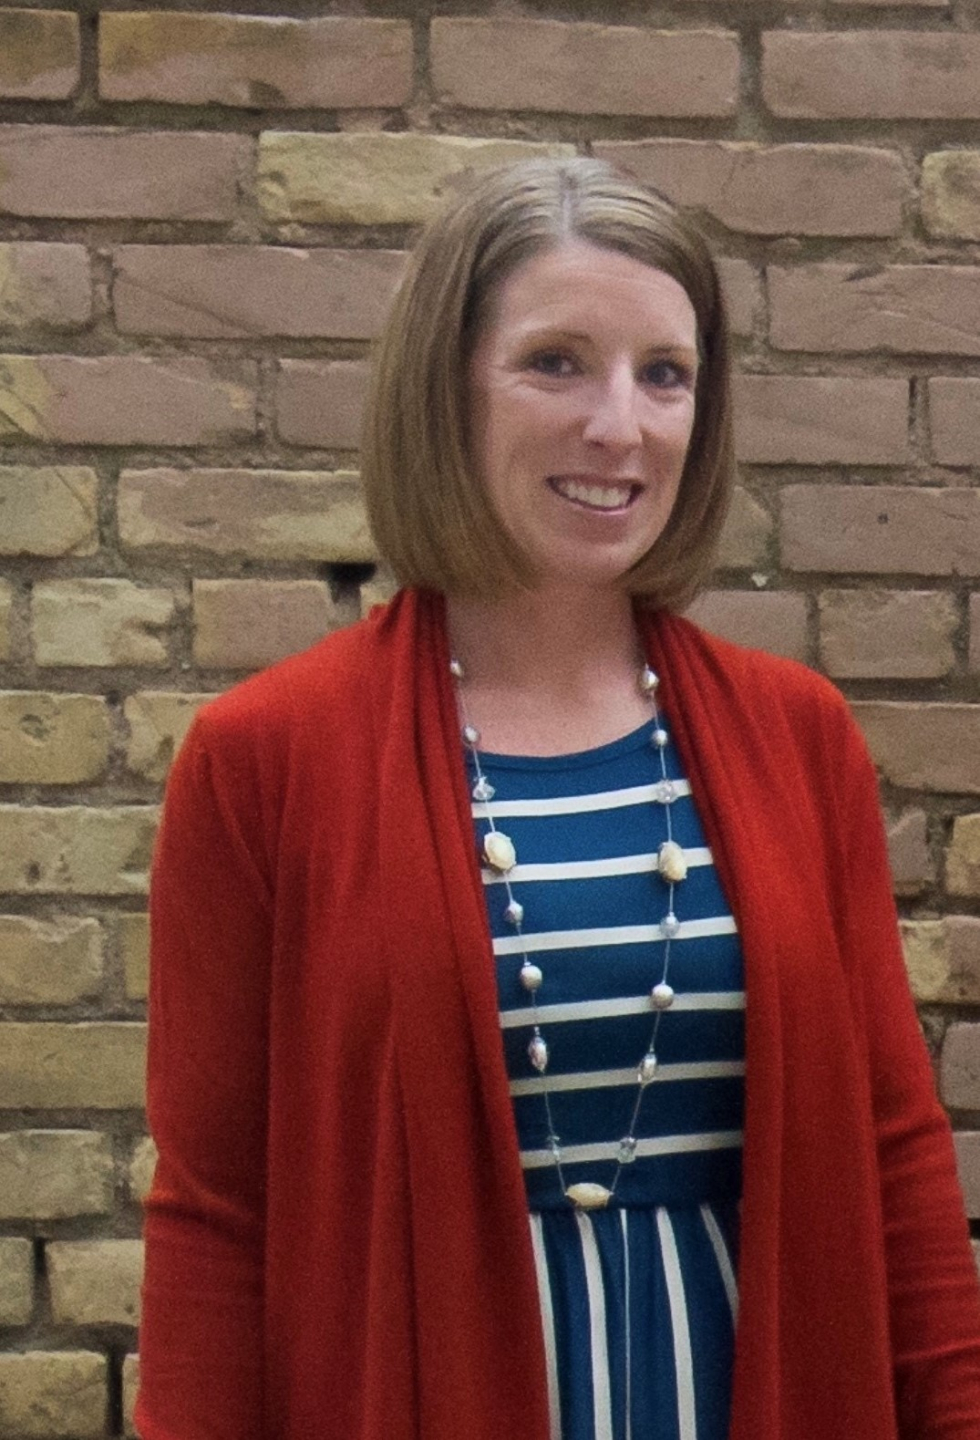 Danielle stands smiling in front of a brick wall wearing a blue and white striped dress, a red cardigan and a long necklace. She has chin-length brown hair.